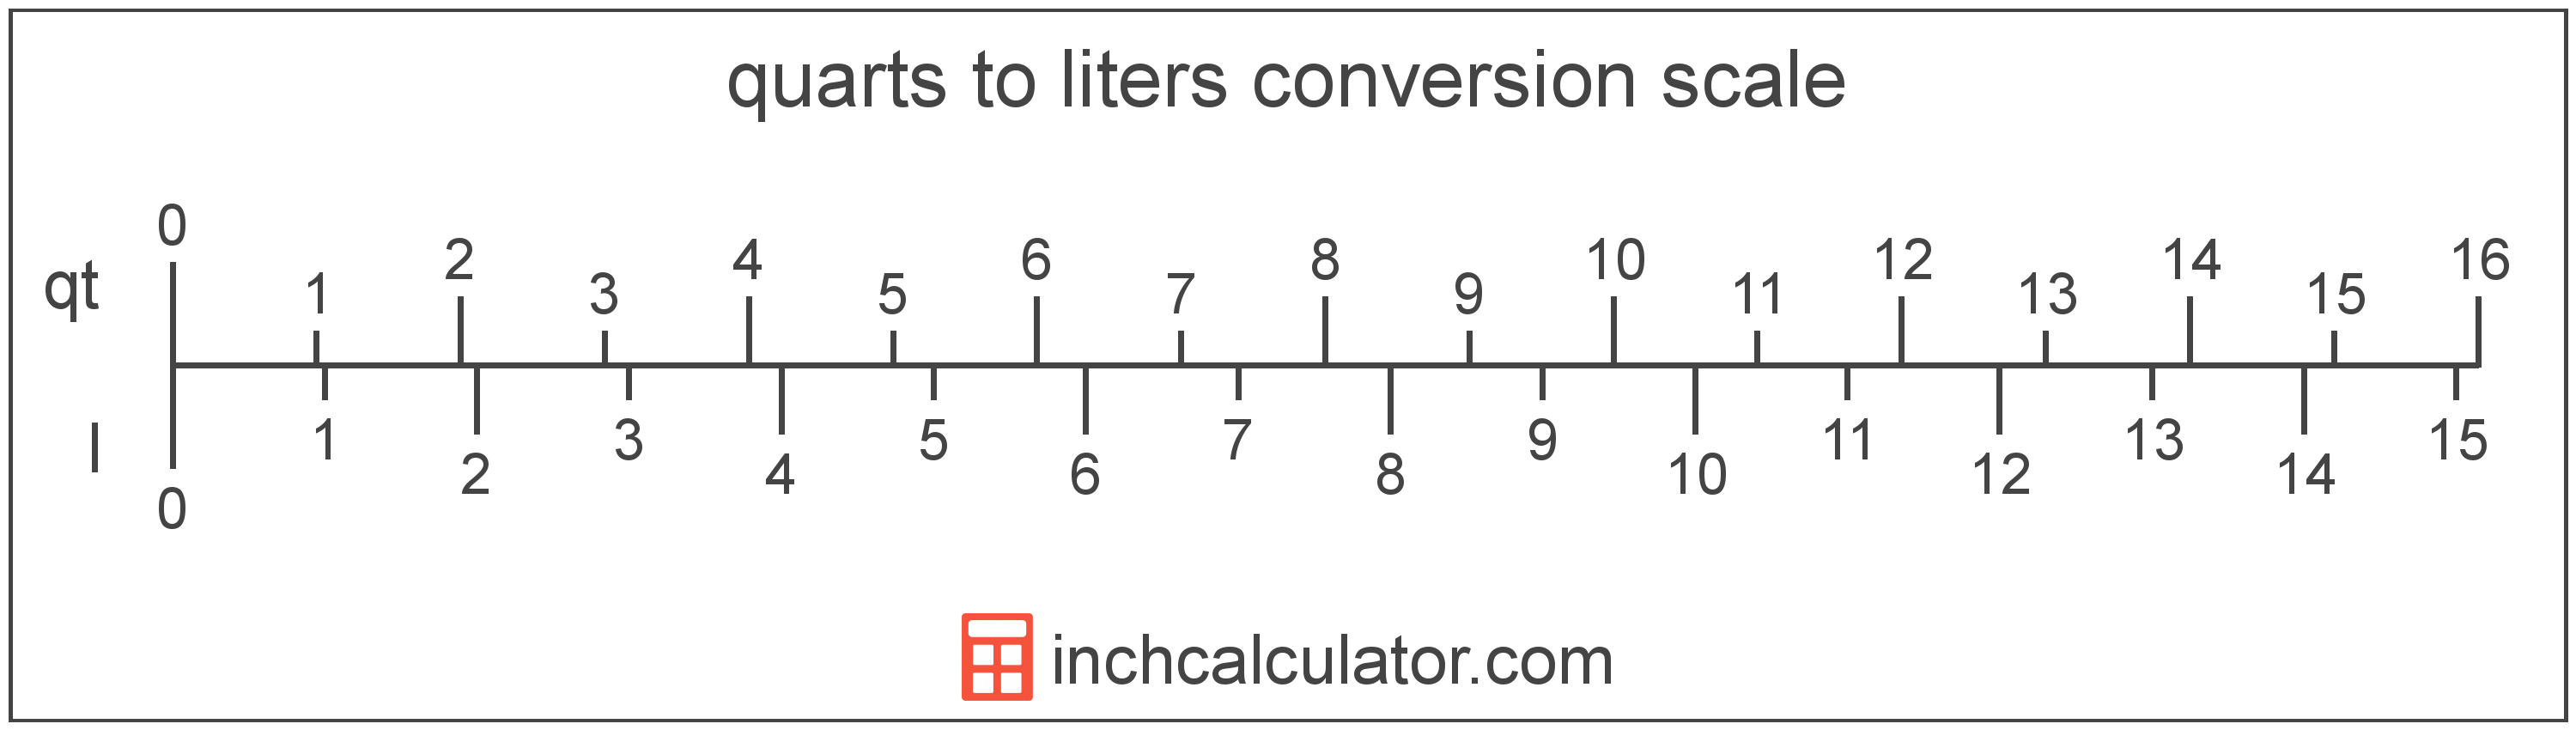 conversion scale showing liters and equivalent quarts volume values